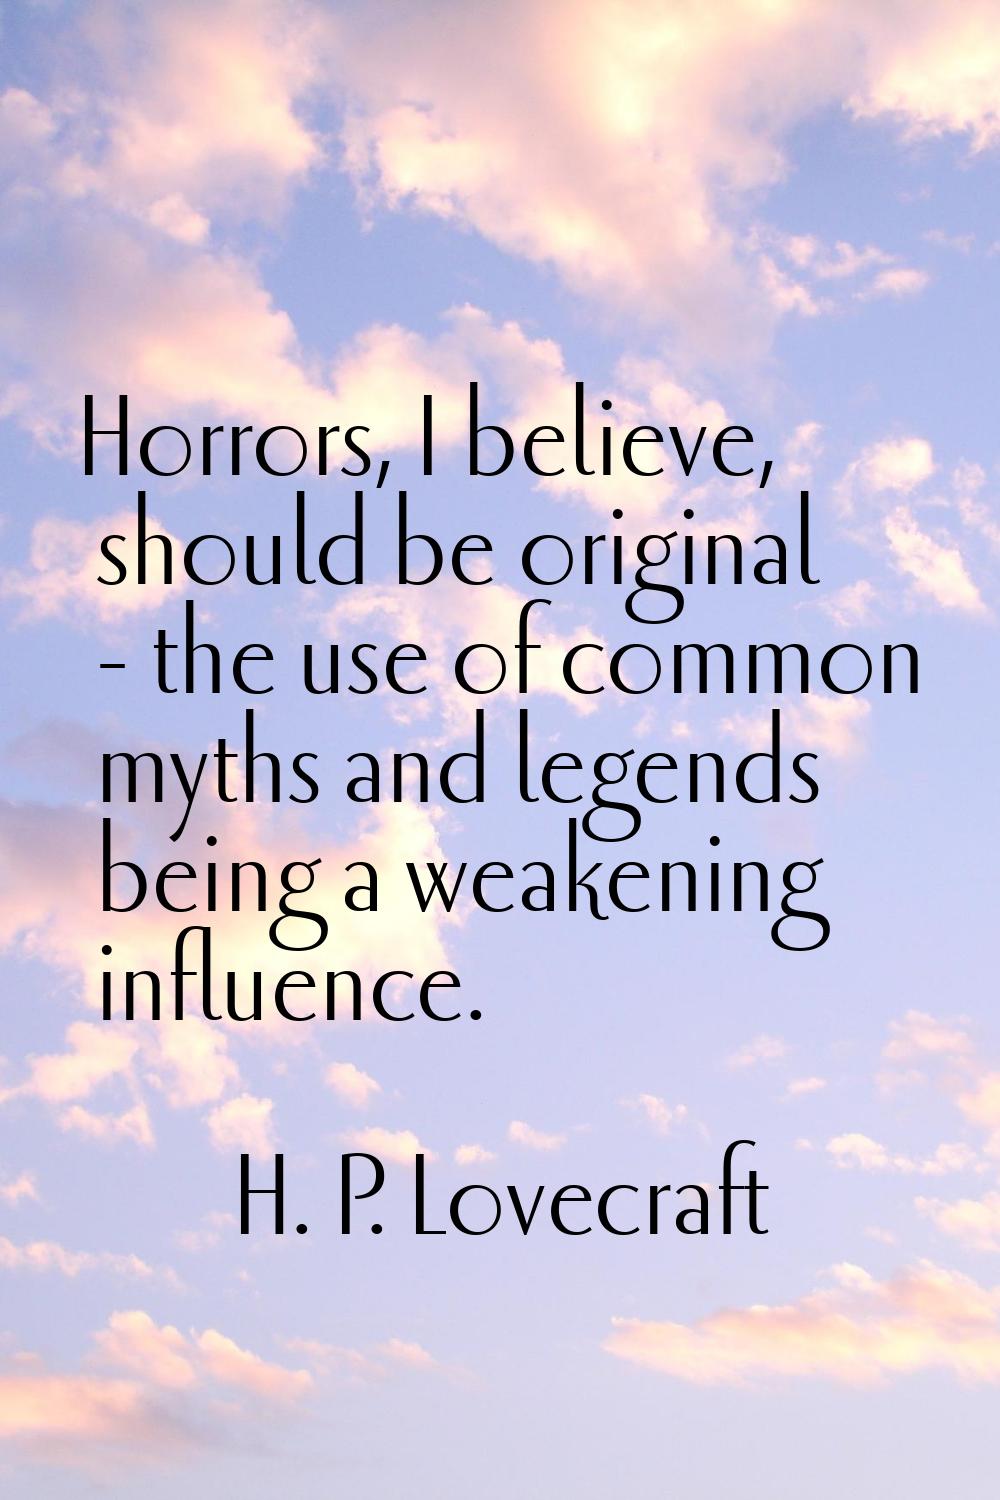 Horrors, I believe, should be original - the use of common myths and legends being a weakening infl